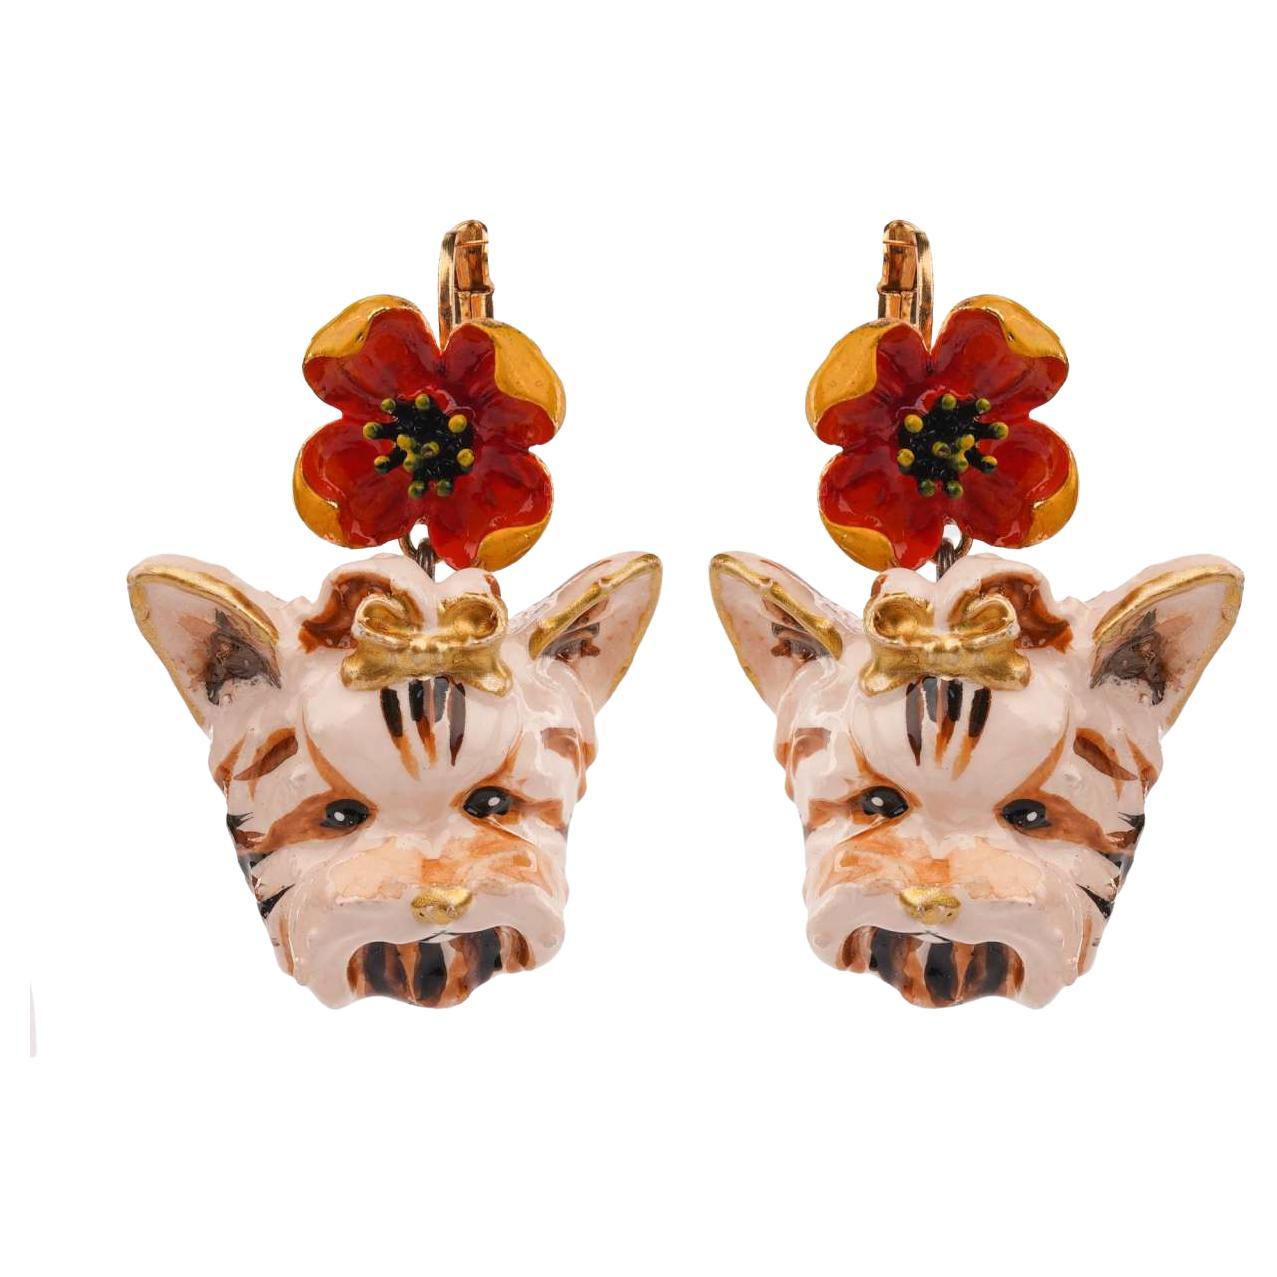 Dolce & Gabbana - Hand Painted Flower Terrier Dog Earrings Gold Red For Sale